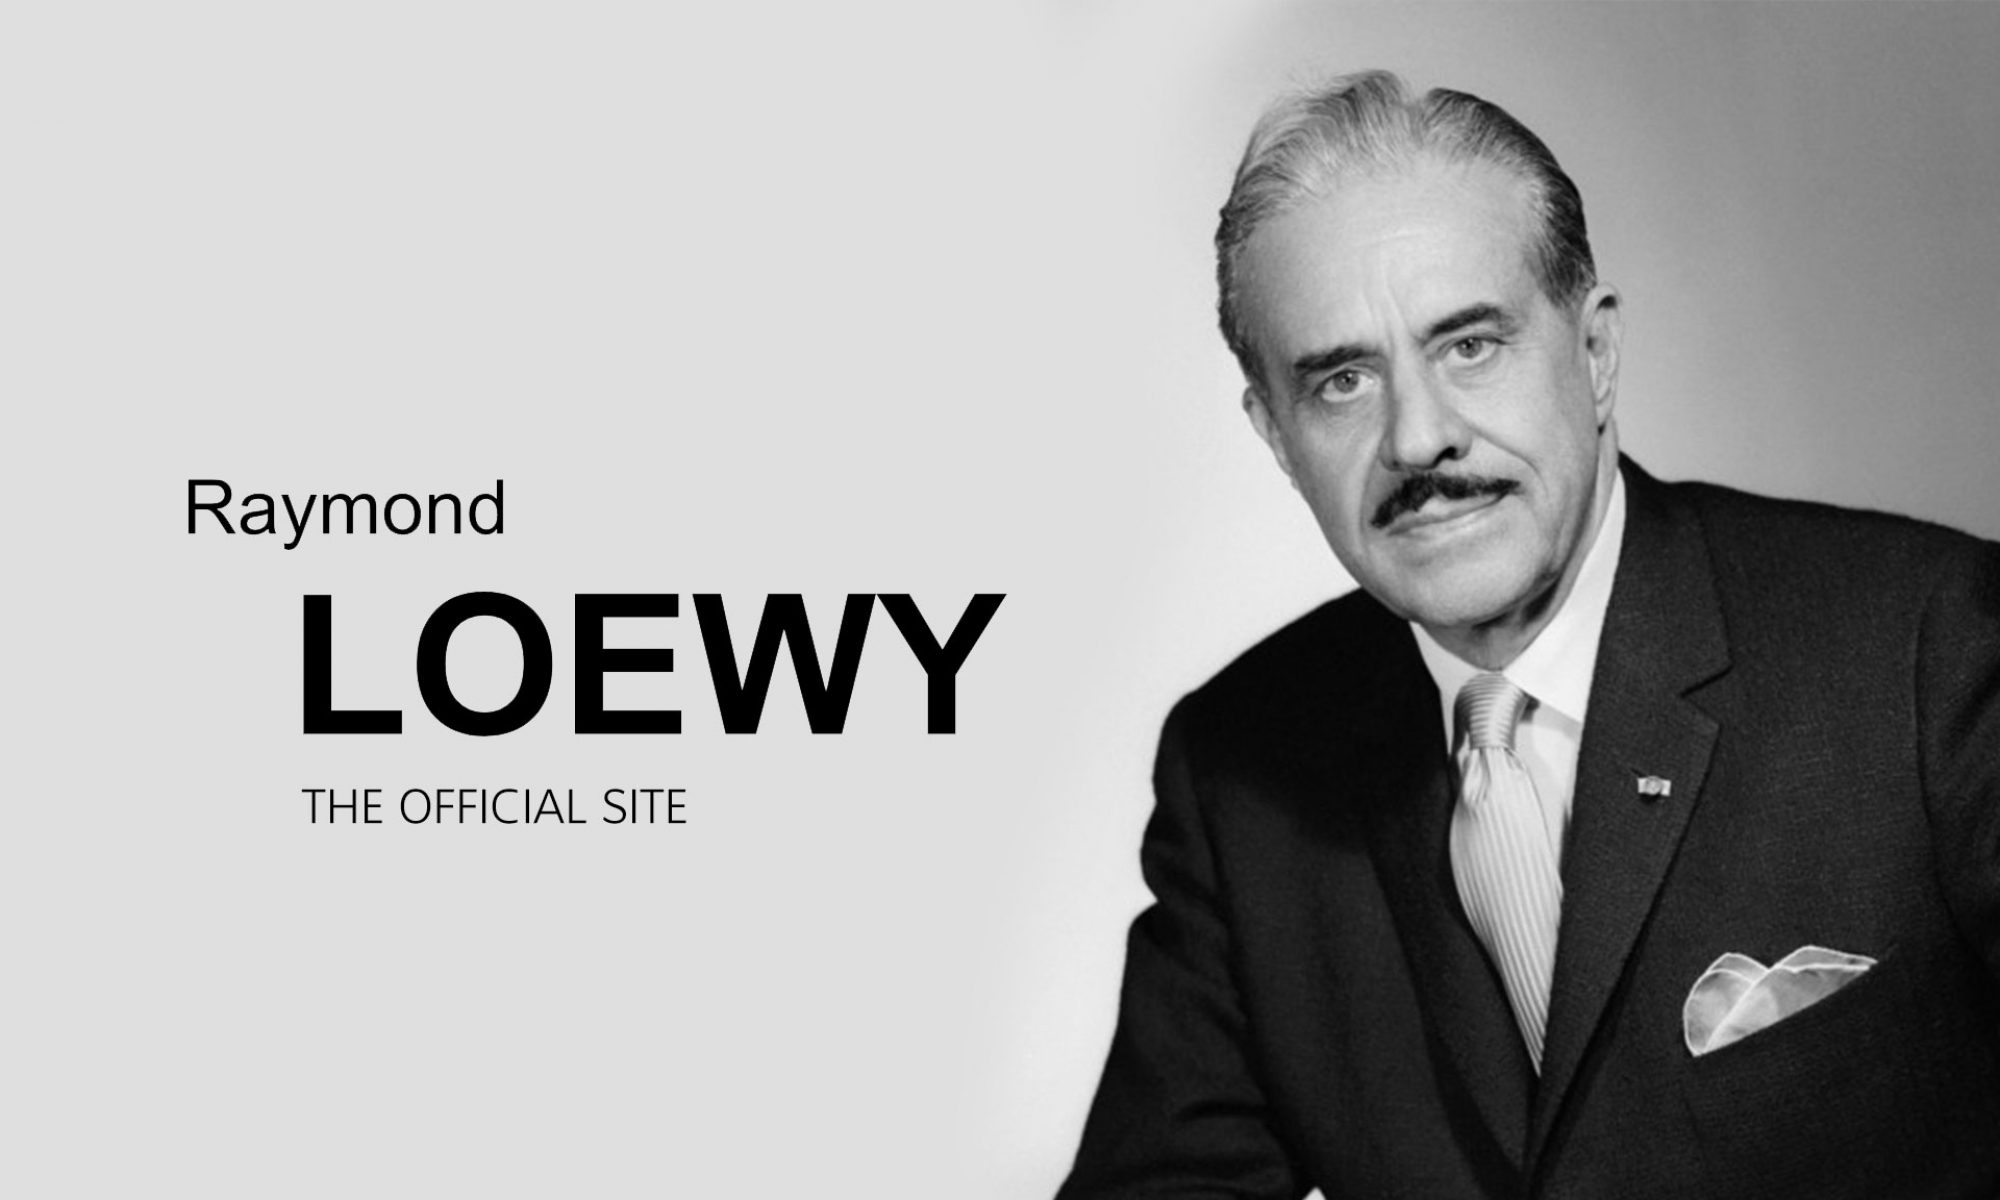 Raymond Loewy: The Father of Industrial Design